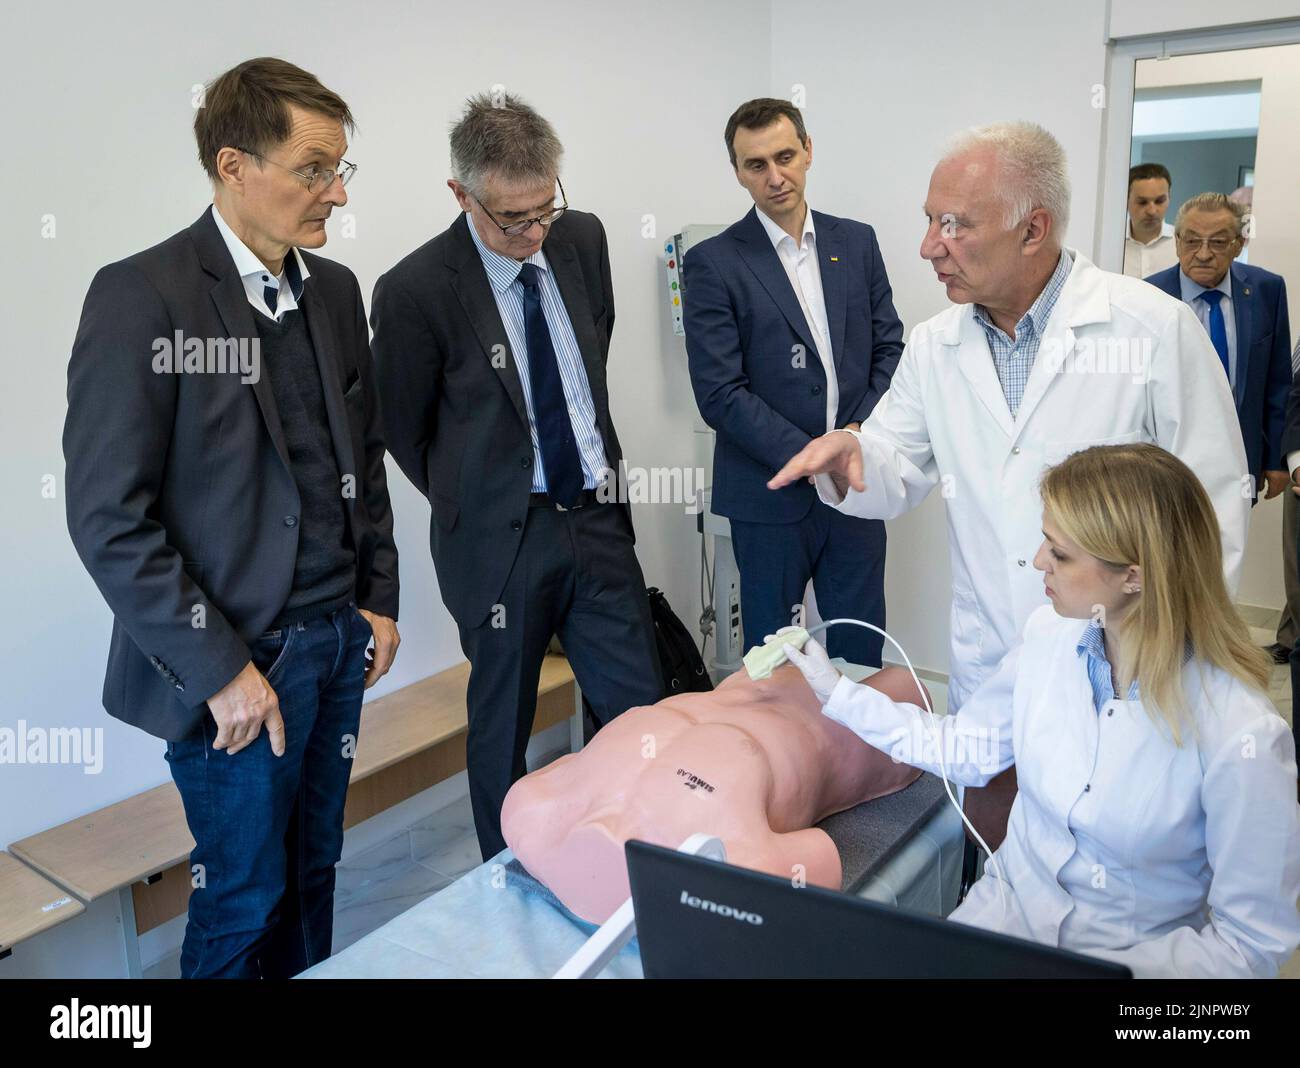 Lviv, Ukraine. 10th June, 2022. Karl Lauterbach (SPD), Federal Minister of Health, visits the training simulation center of the Lviv National Medical University na Danylo in the Ukrainian city of Lviv (Lemberg). Here doctors are trained on dummies and with the help of computer simulations, Credit: dpa/Alamy Live News Stock Photo